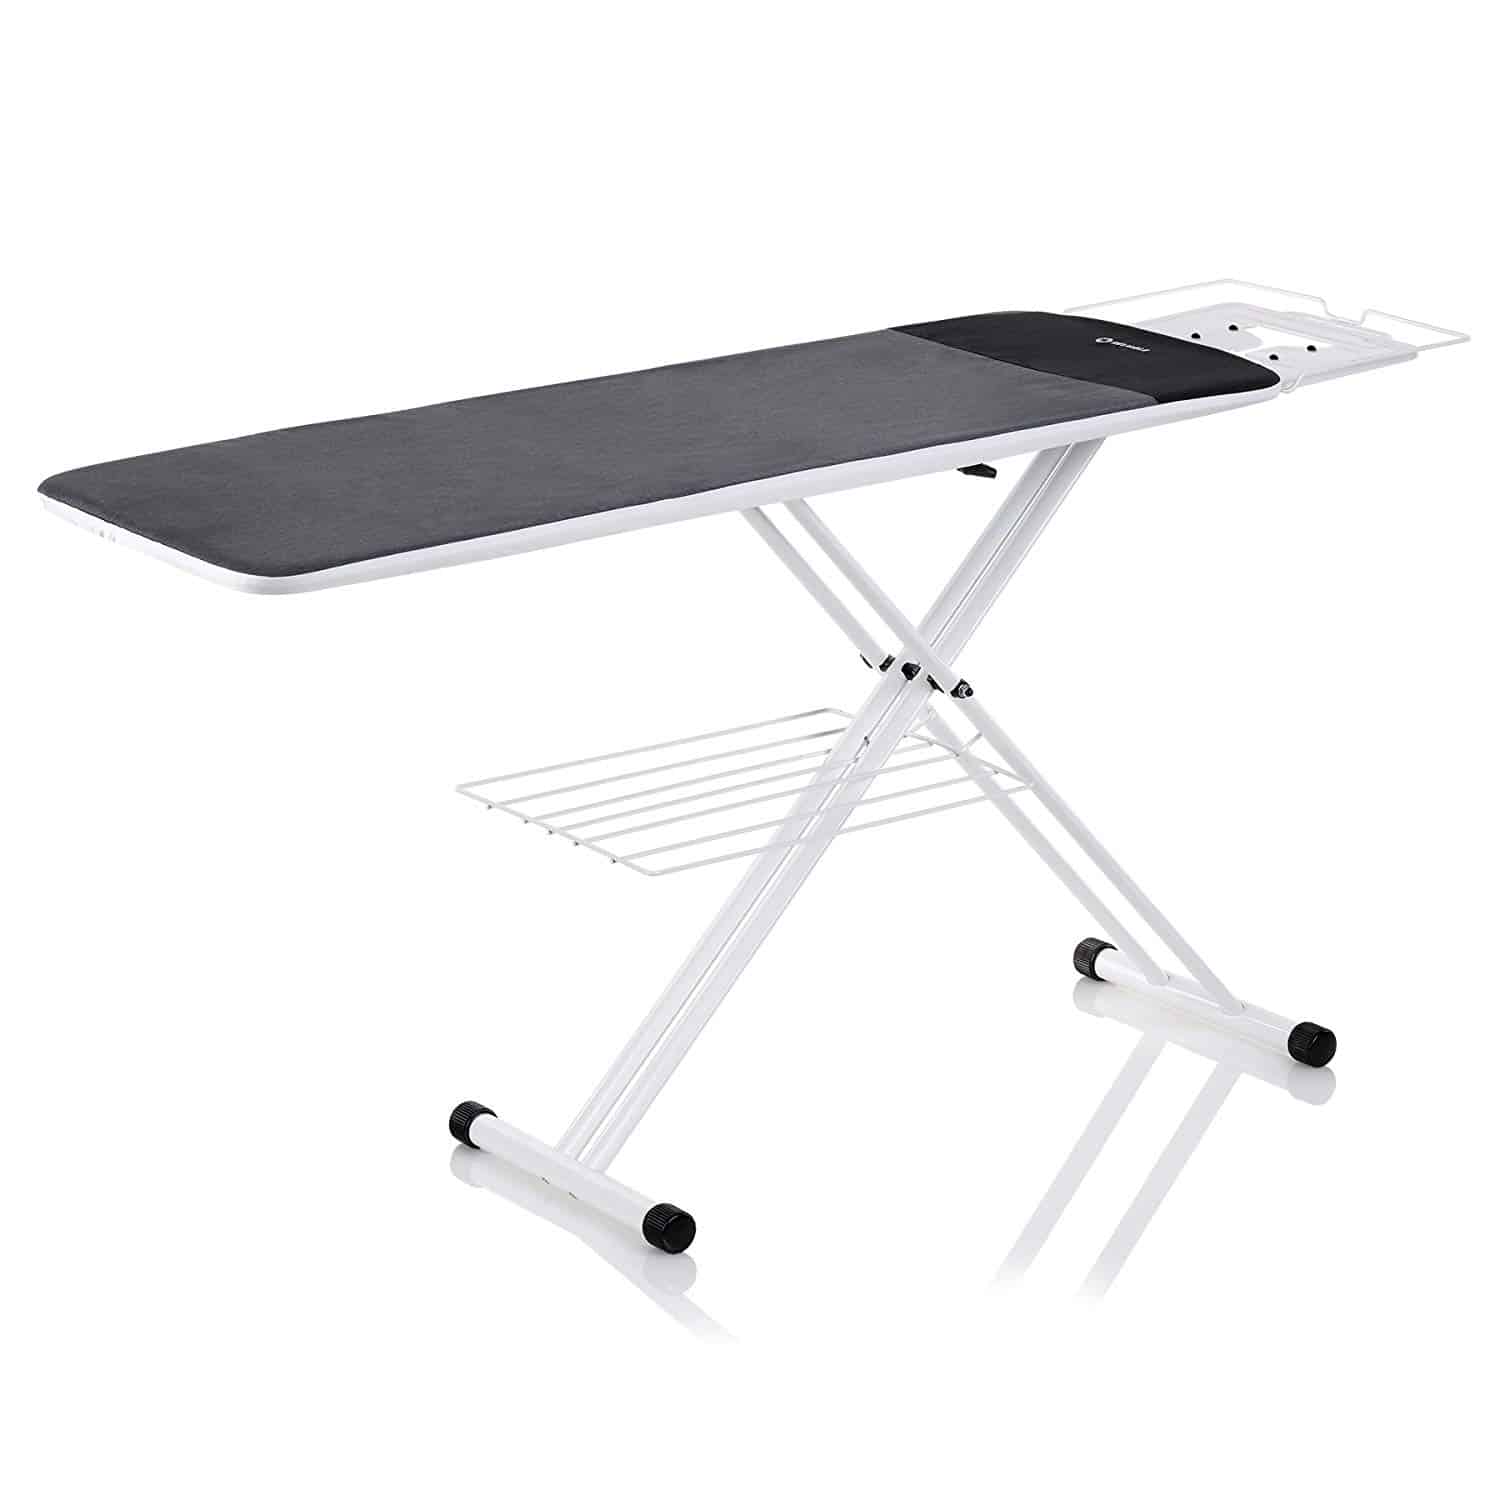 Top 10 Best Ironing Boards in 2023 Reviews Buyer's Guide